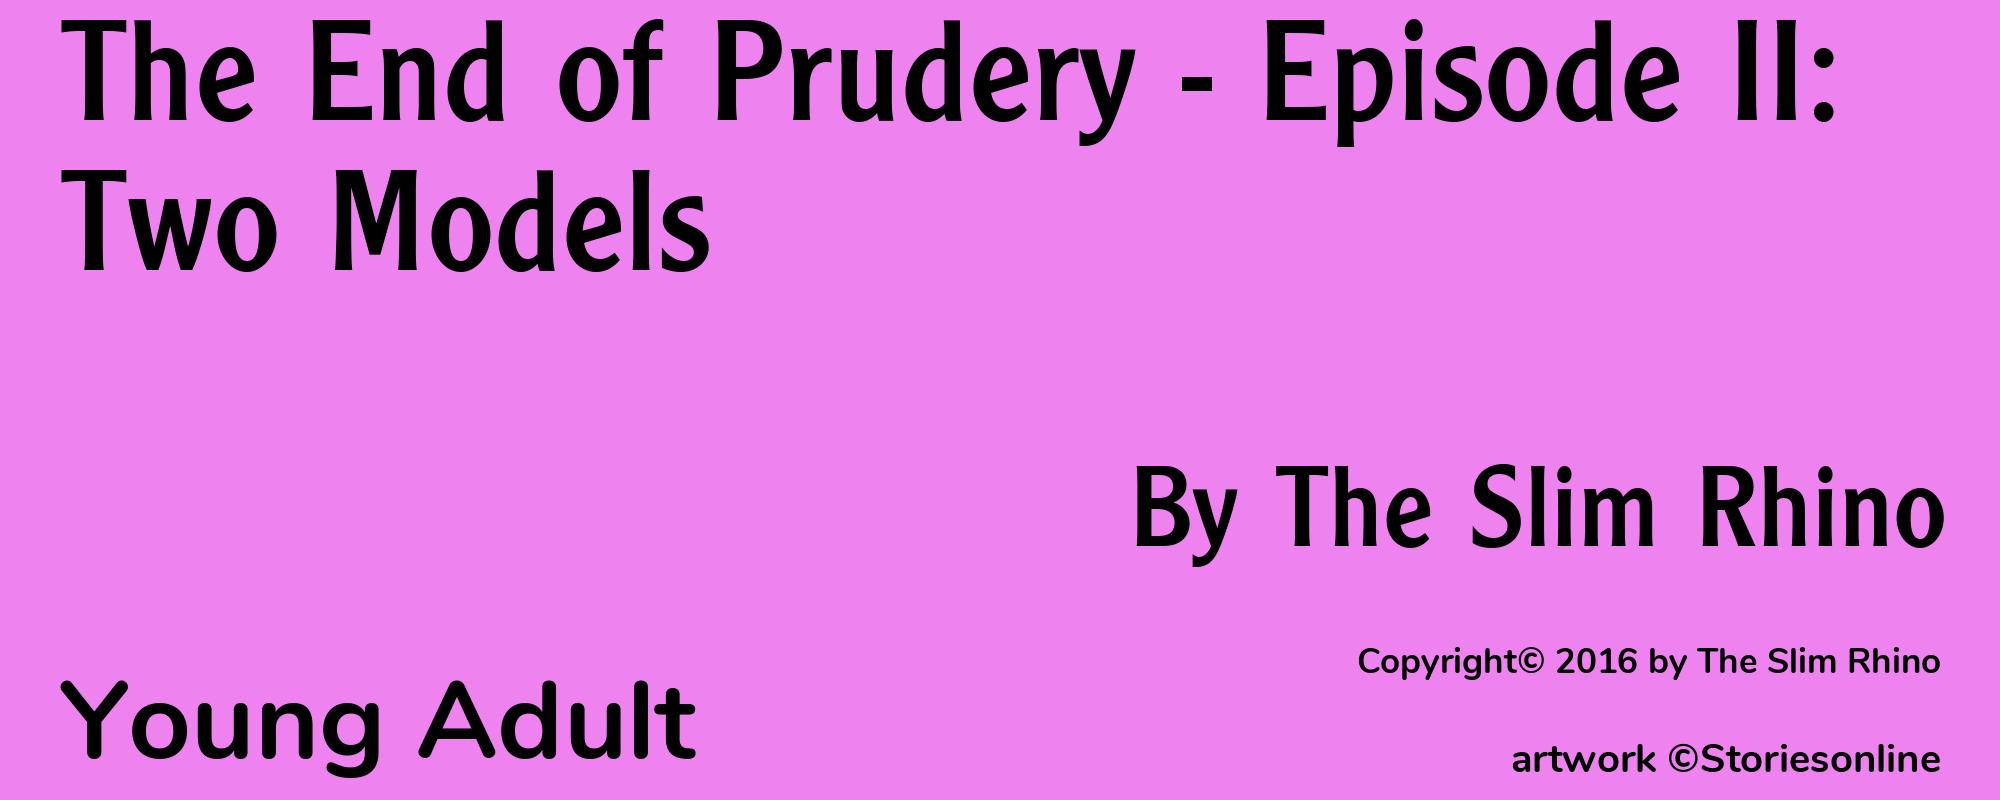 The End of Prudery - Episode II: Two Models - Cover